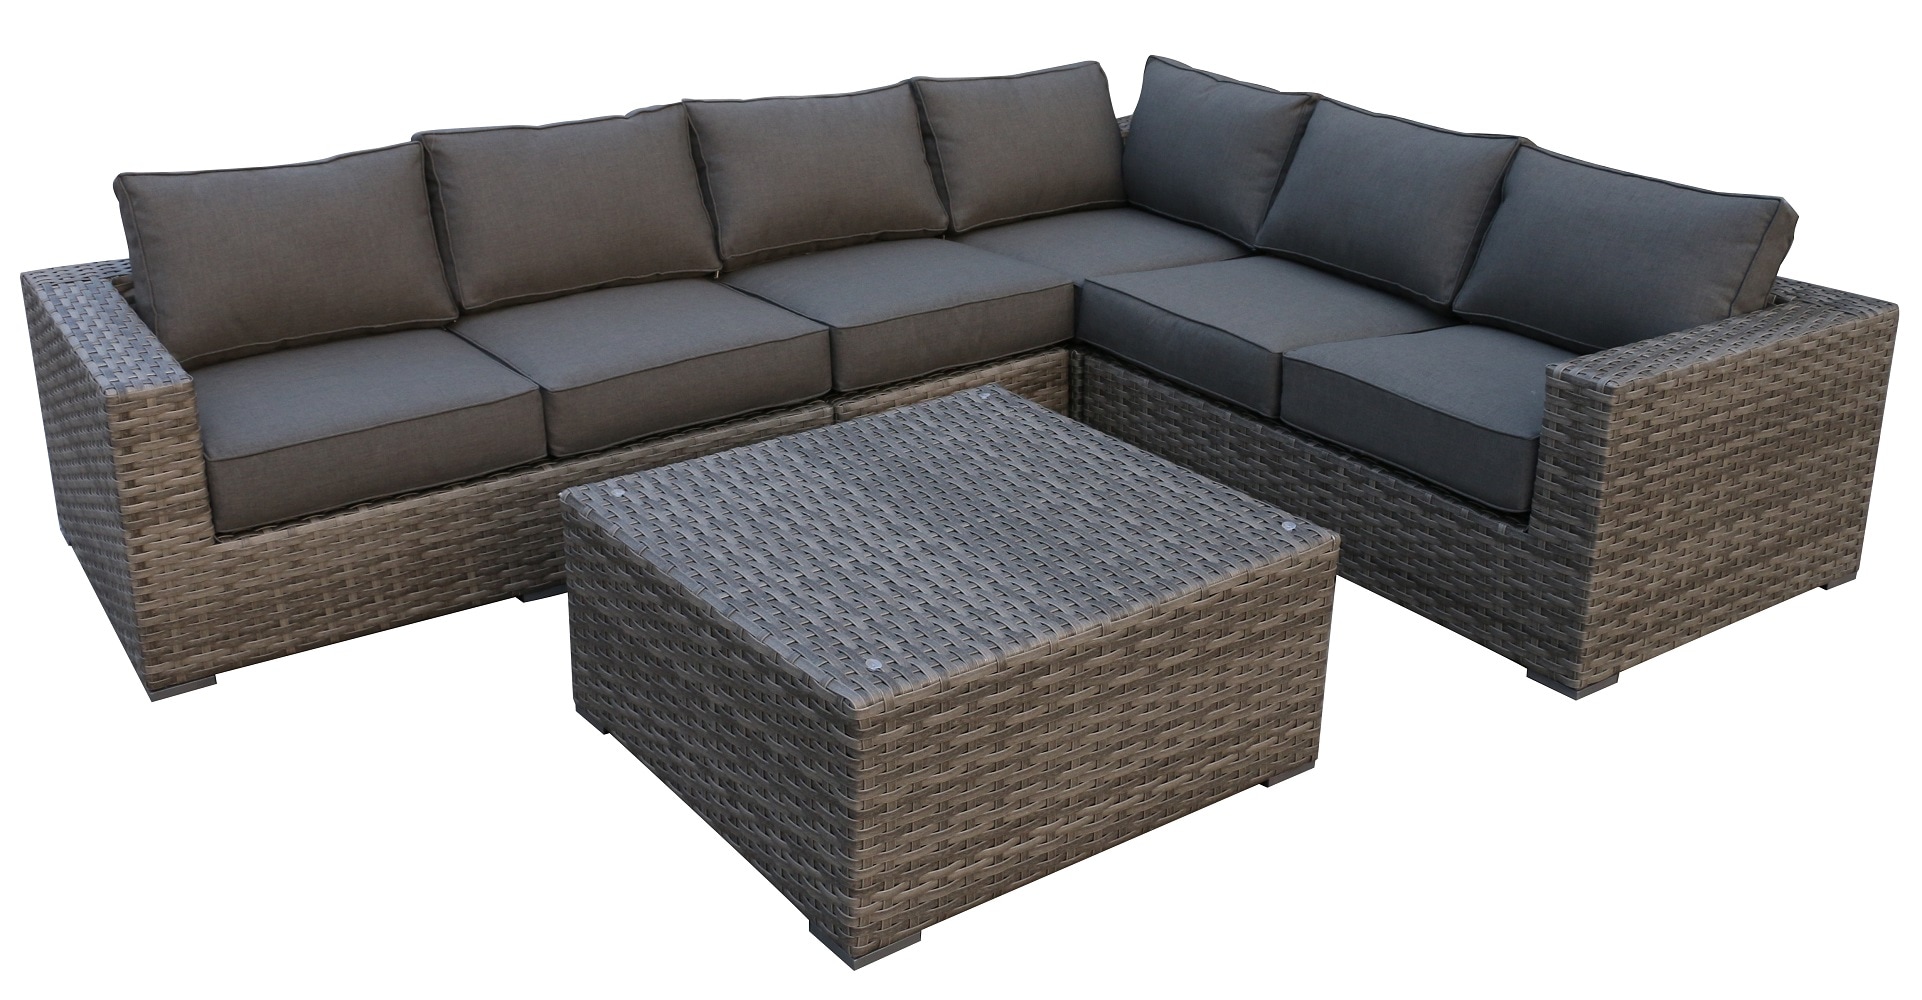 geest Intact afbreken Teva Furniture Bali 4-Piece Wicker Patio Conversation Set with Gray  Sunbrella Cushions in the Patio Conversation Sets department at Lowes.com